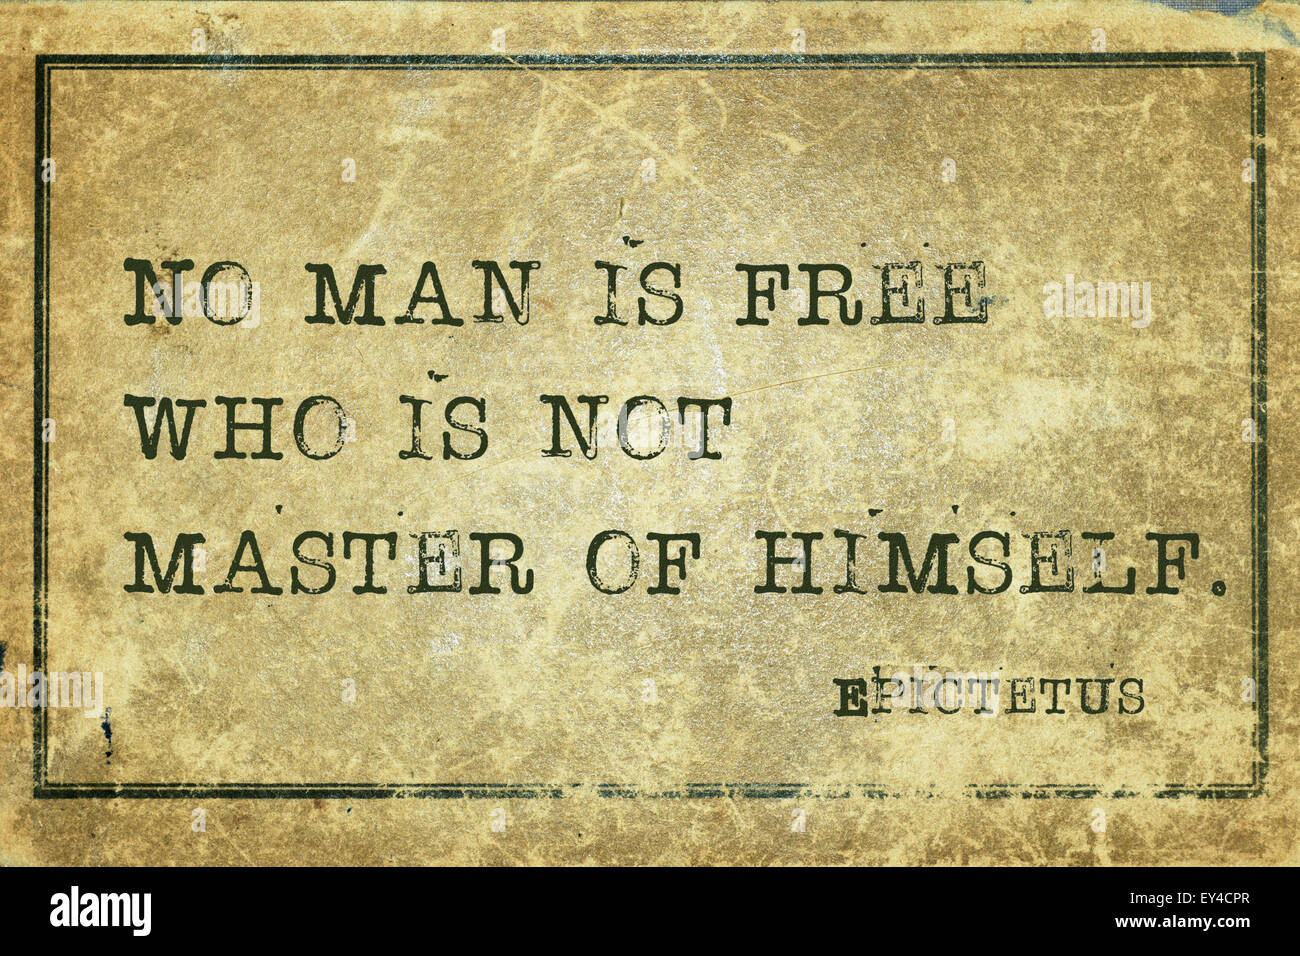 No man is free who is not master of himself - ancient Greek philosopher Epictetus quote printed on grunge vintage cardboard Stock Photo